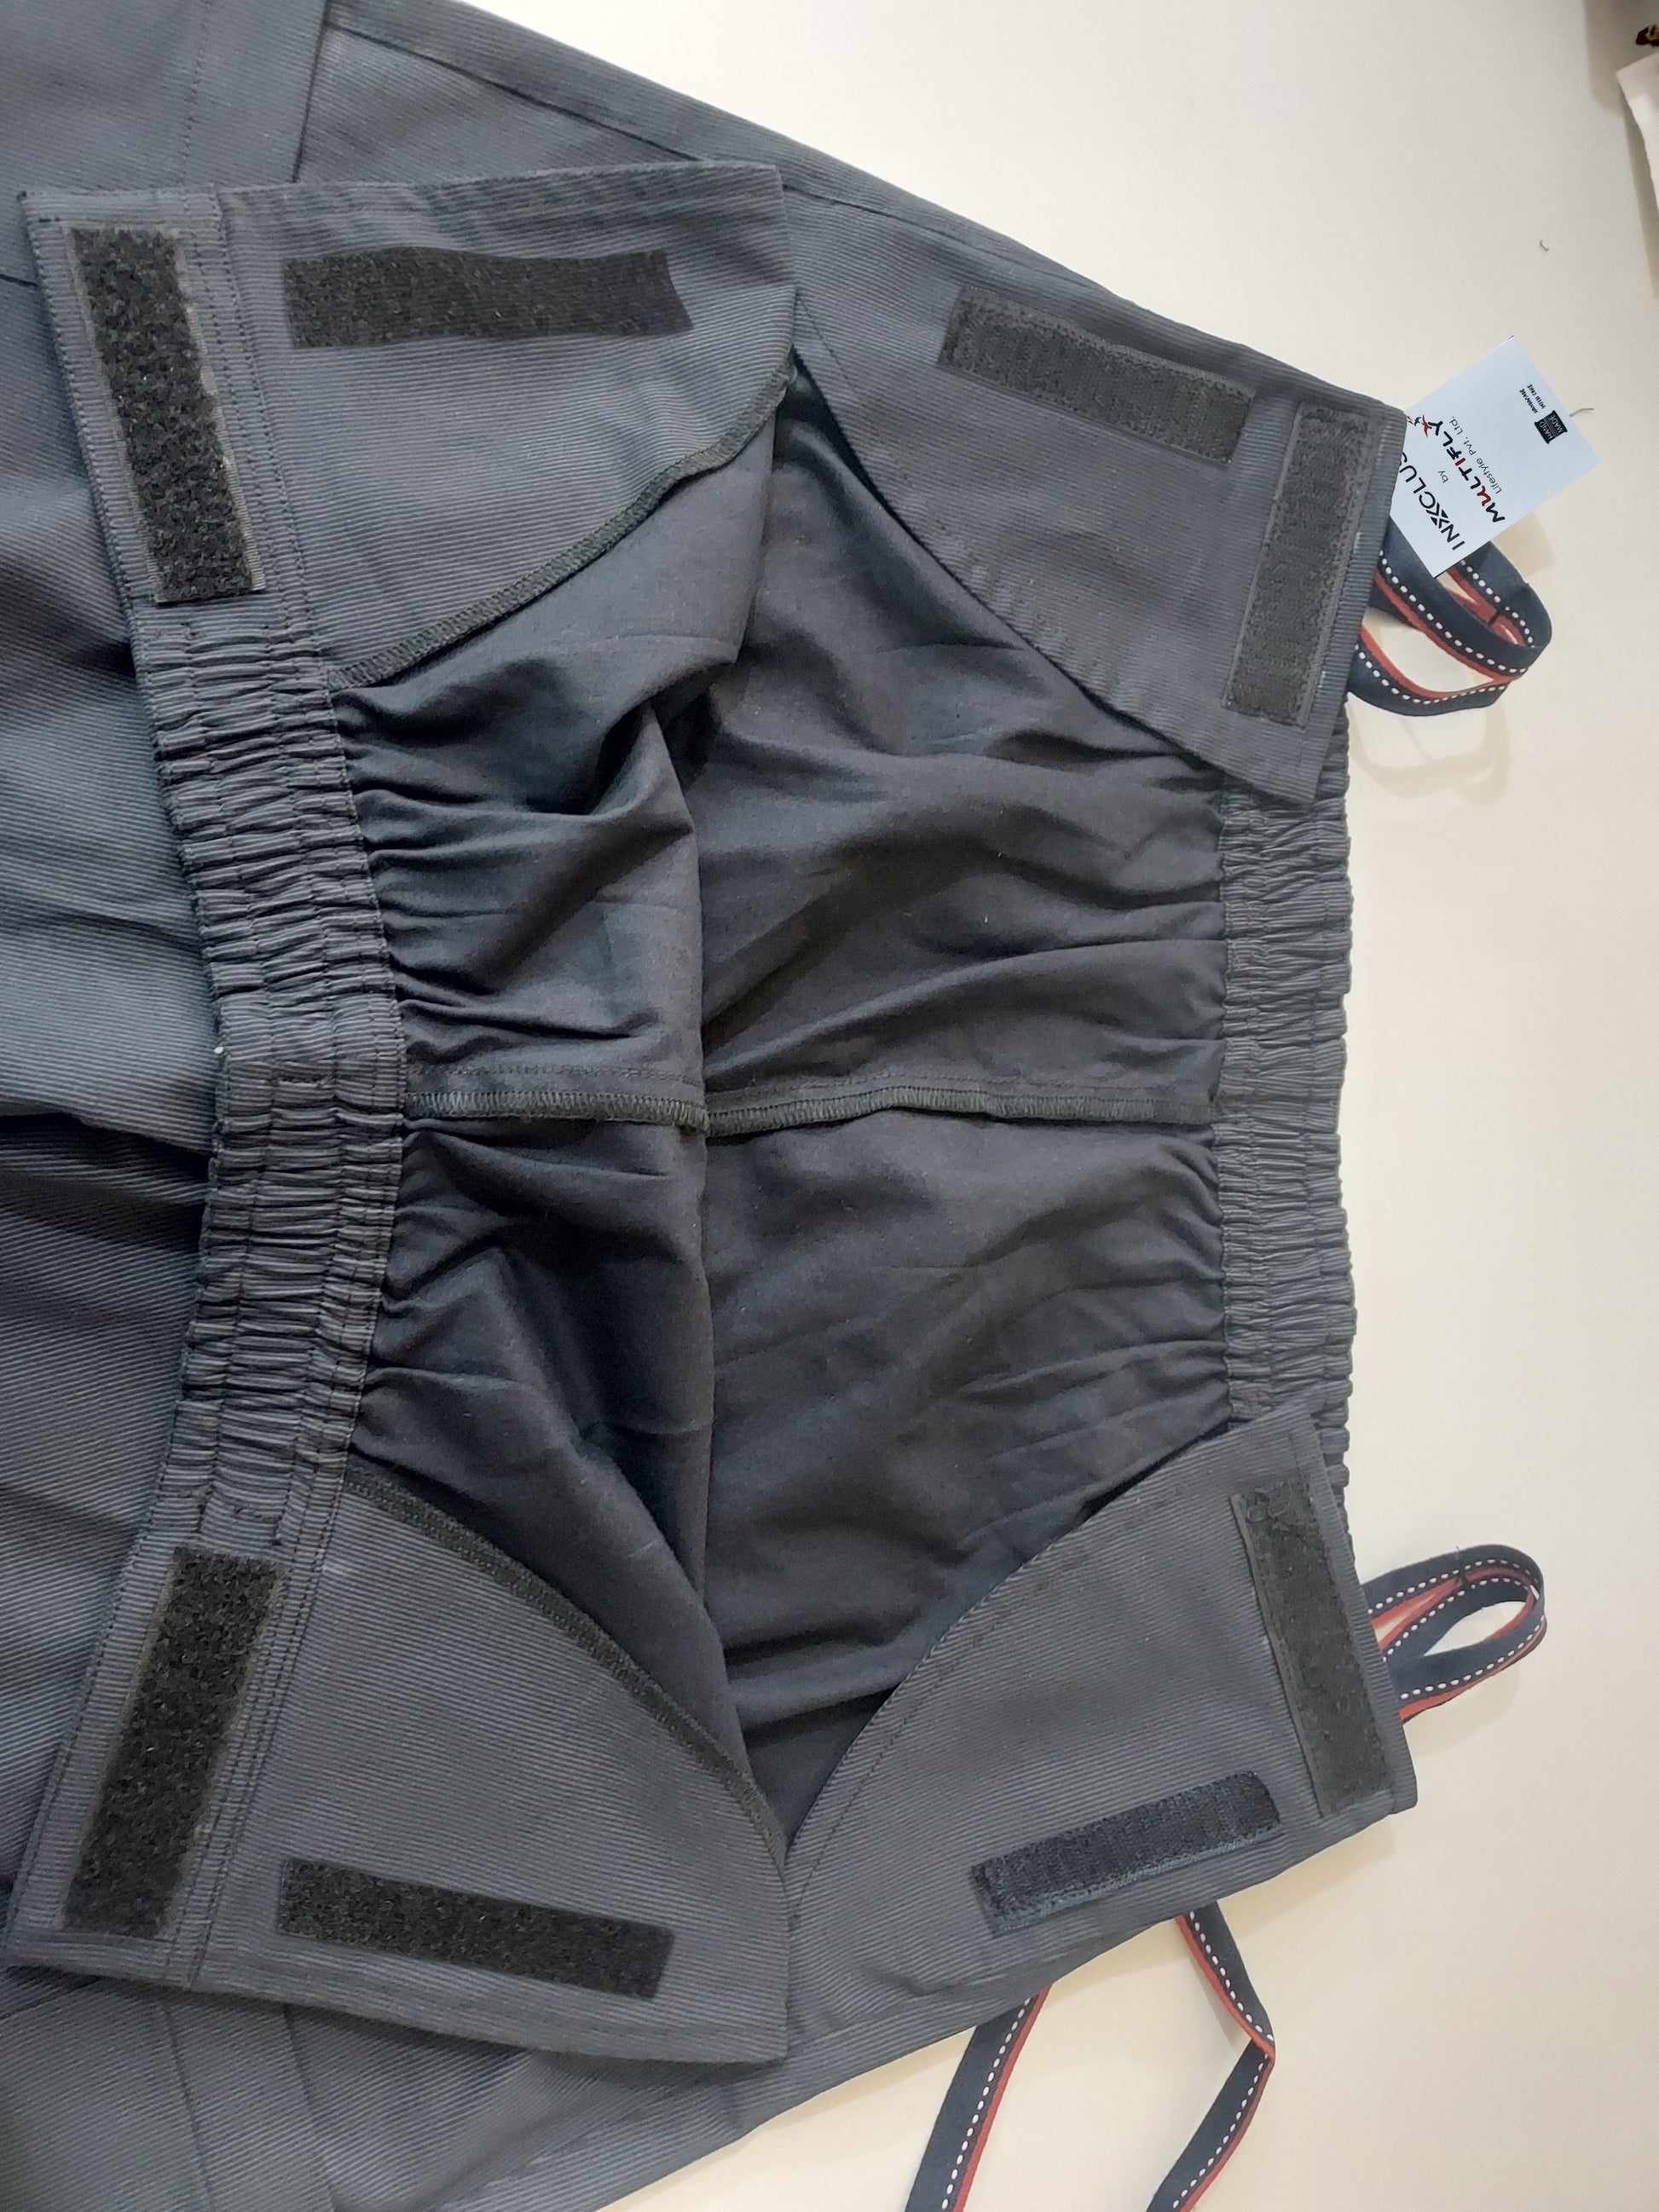 In this picture, one can see the front of the trousers opened fully. elastic, loops and velcros are visible.